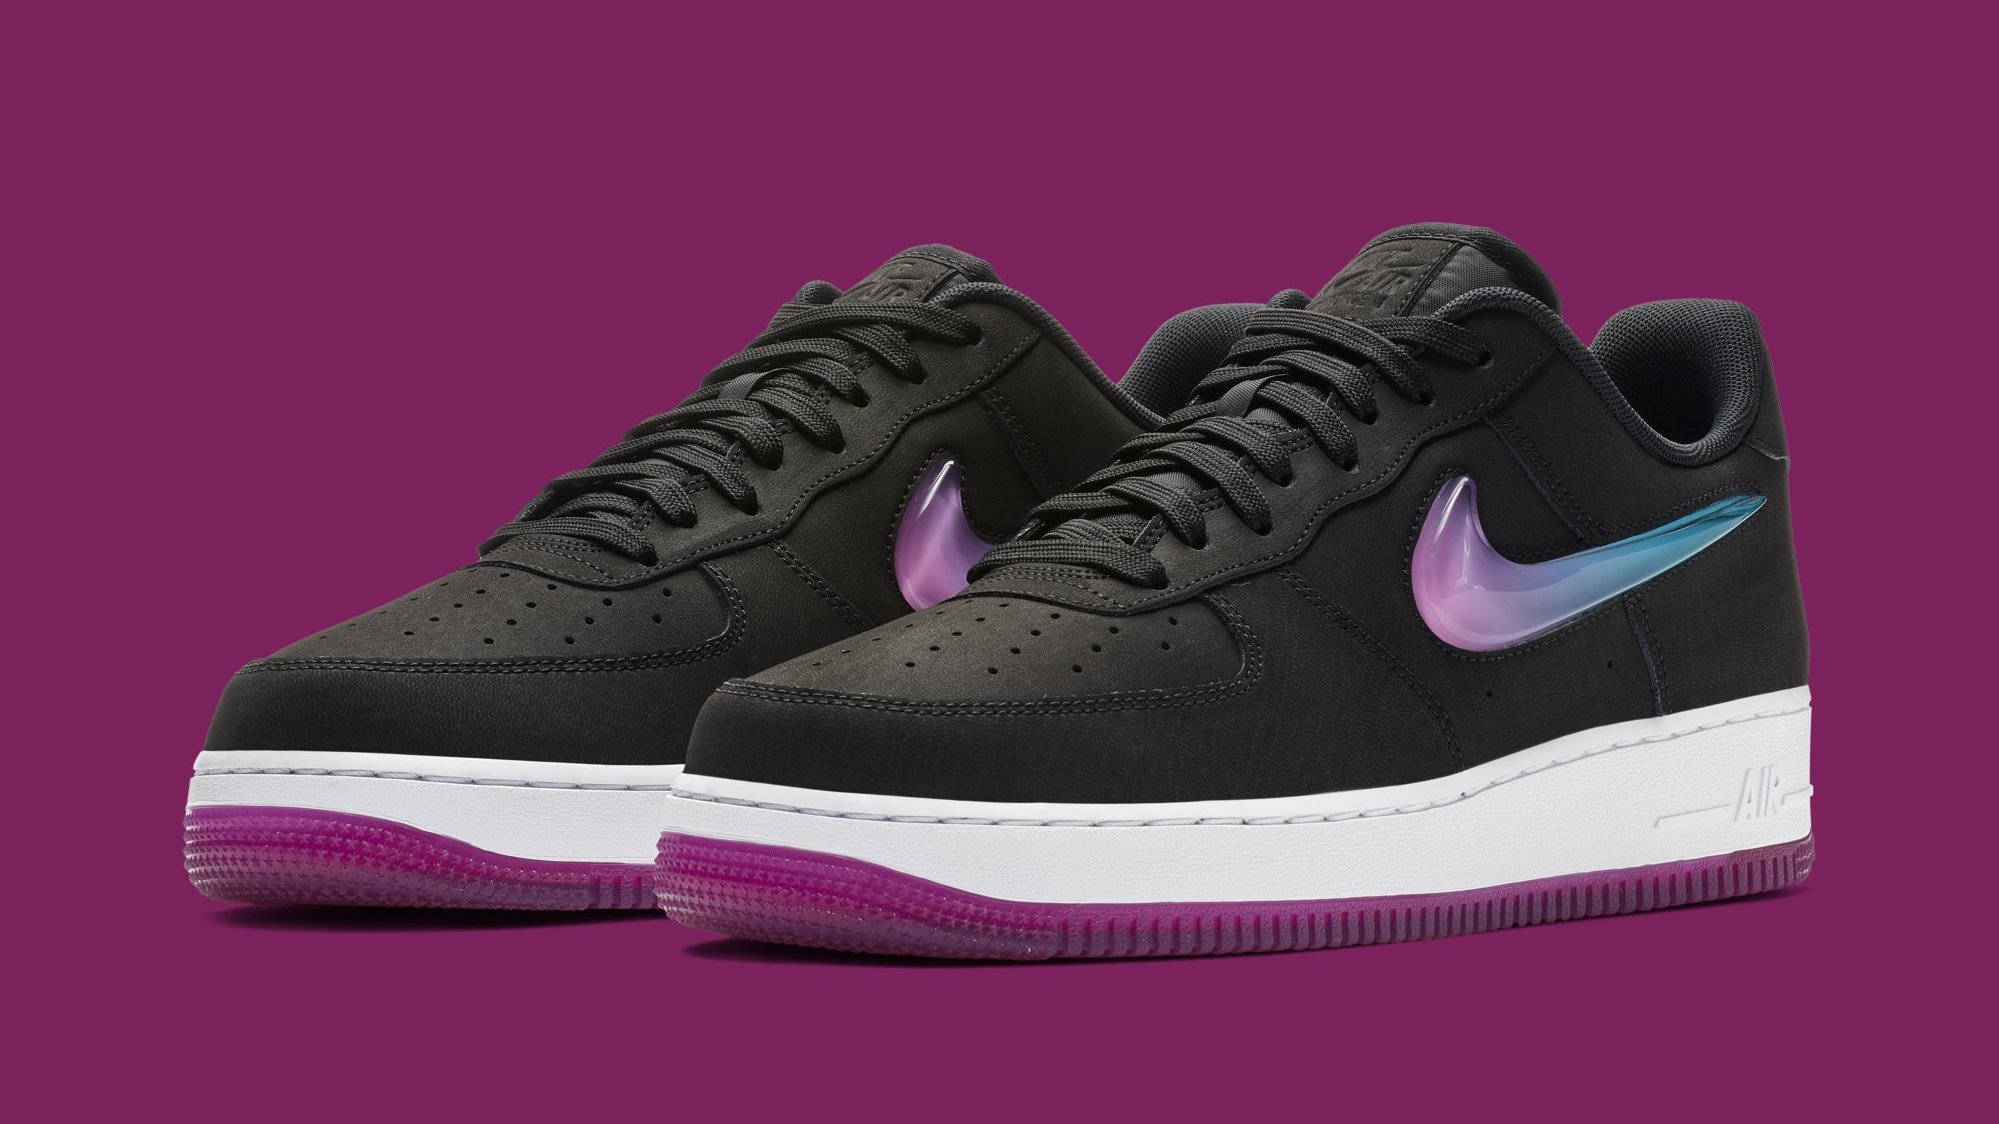 un acreedor Buscar a tientas Nueve Nike Air Force 1 Low Jewel 'Black/Active Fuchsia-Blue Lagoon-White'  AT4143-001 Release Date | Sole Collector